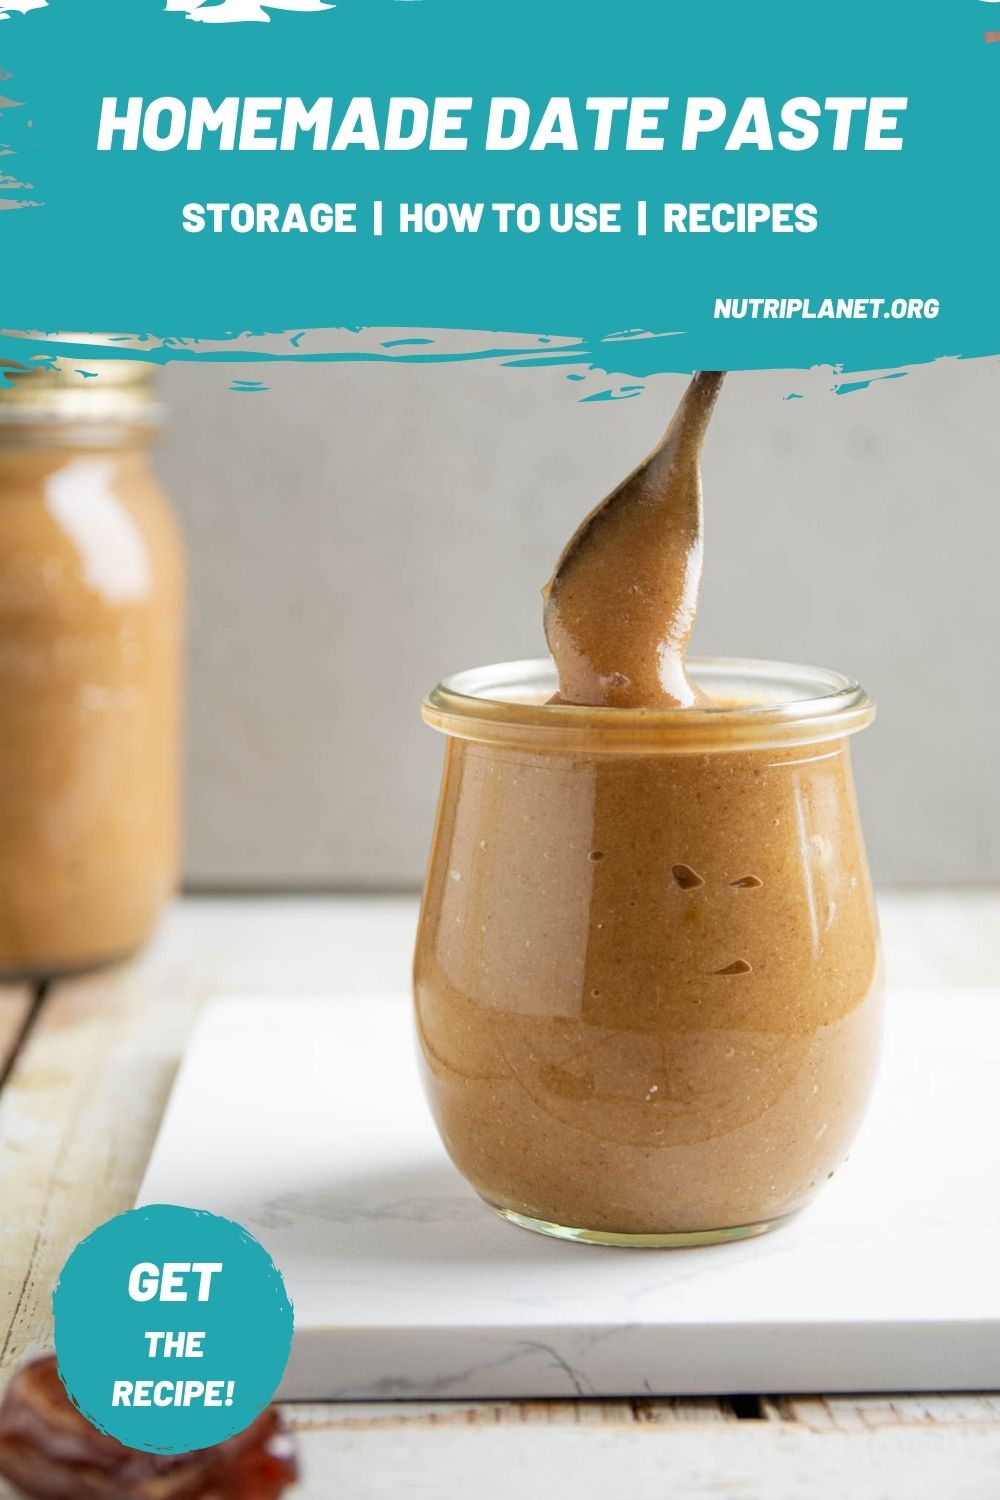 Learn how to make date paste with just 2 ingredients in a high-speed blender. You'll end up with creamy and sweet caramel deliciousness.